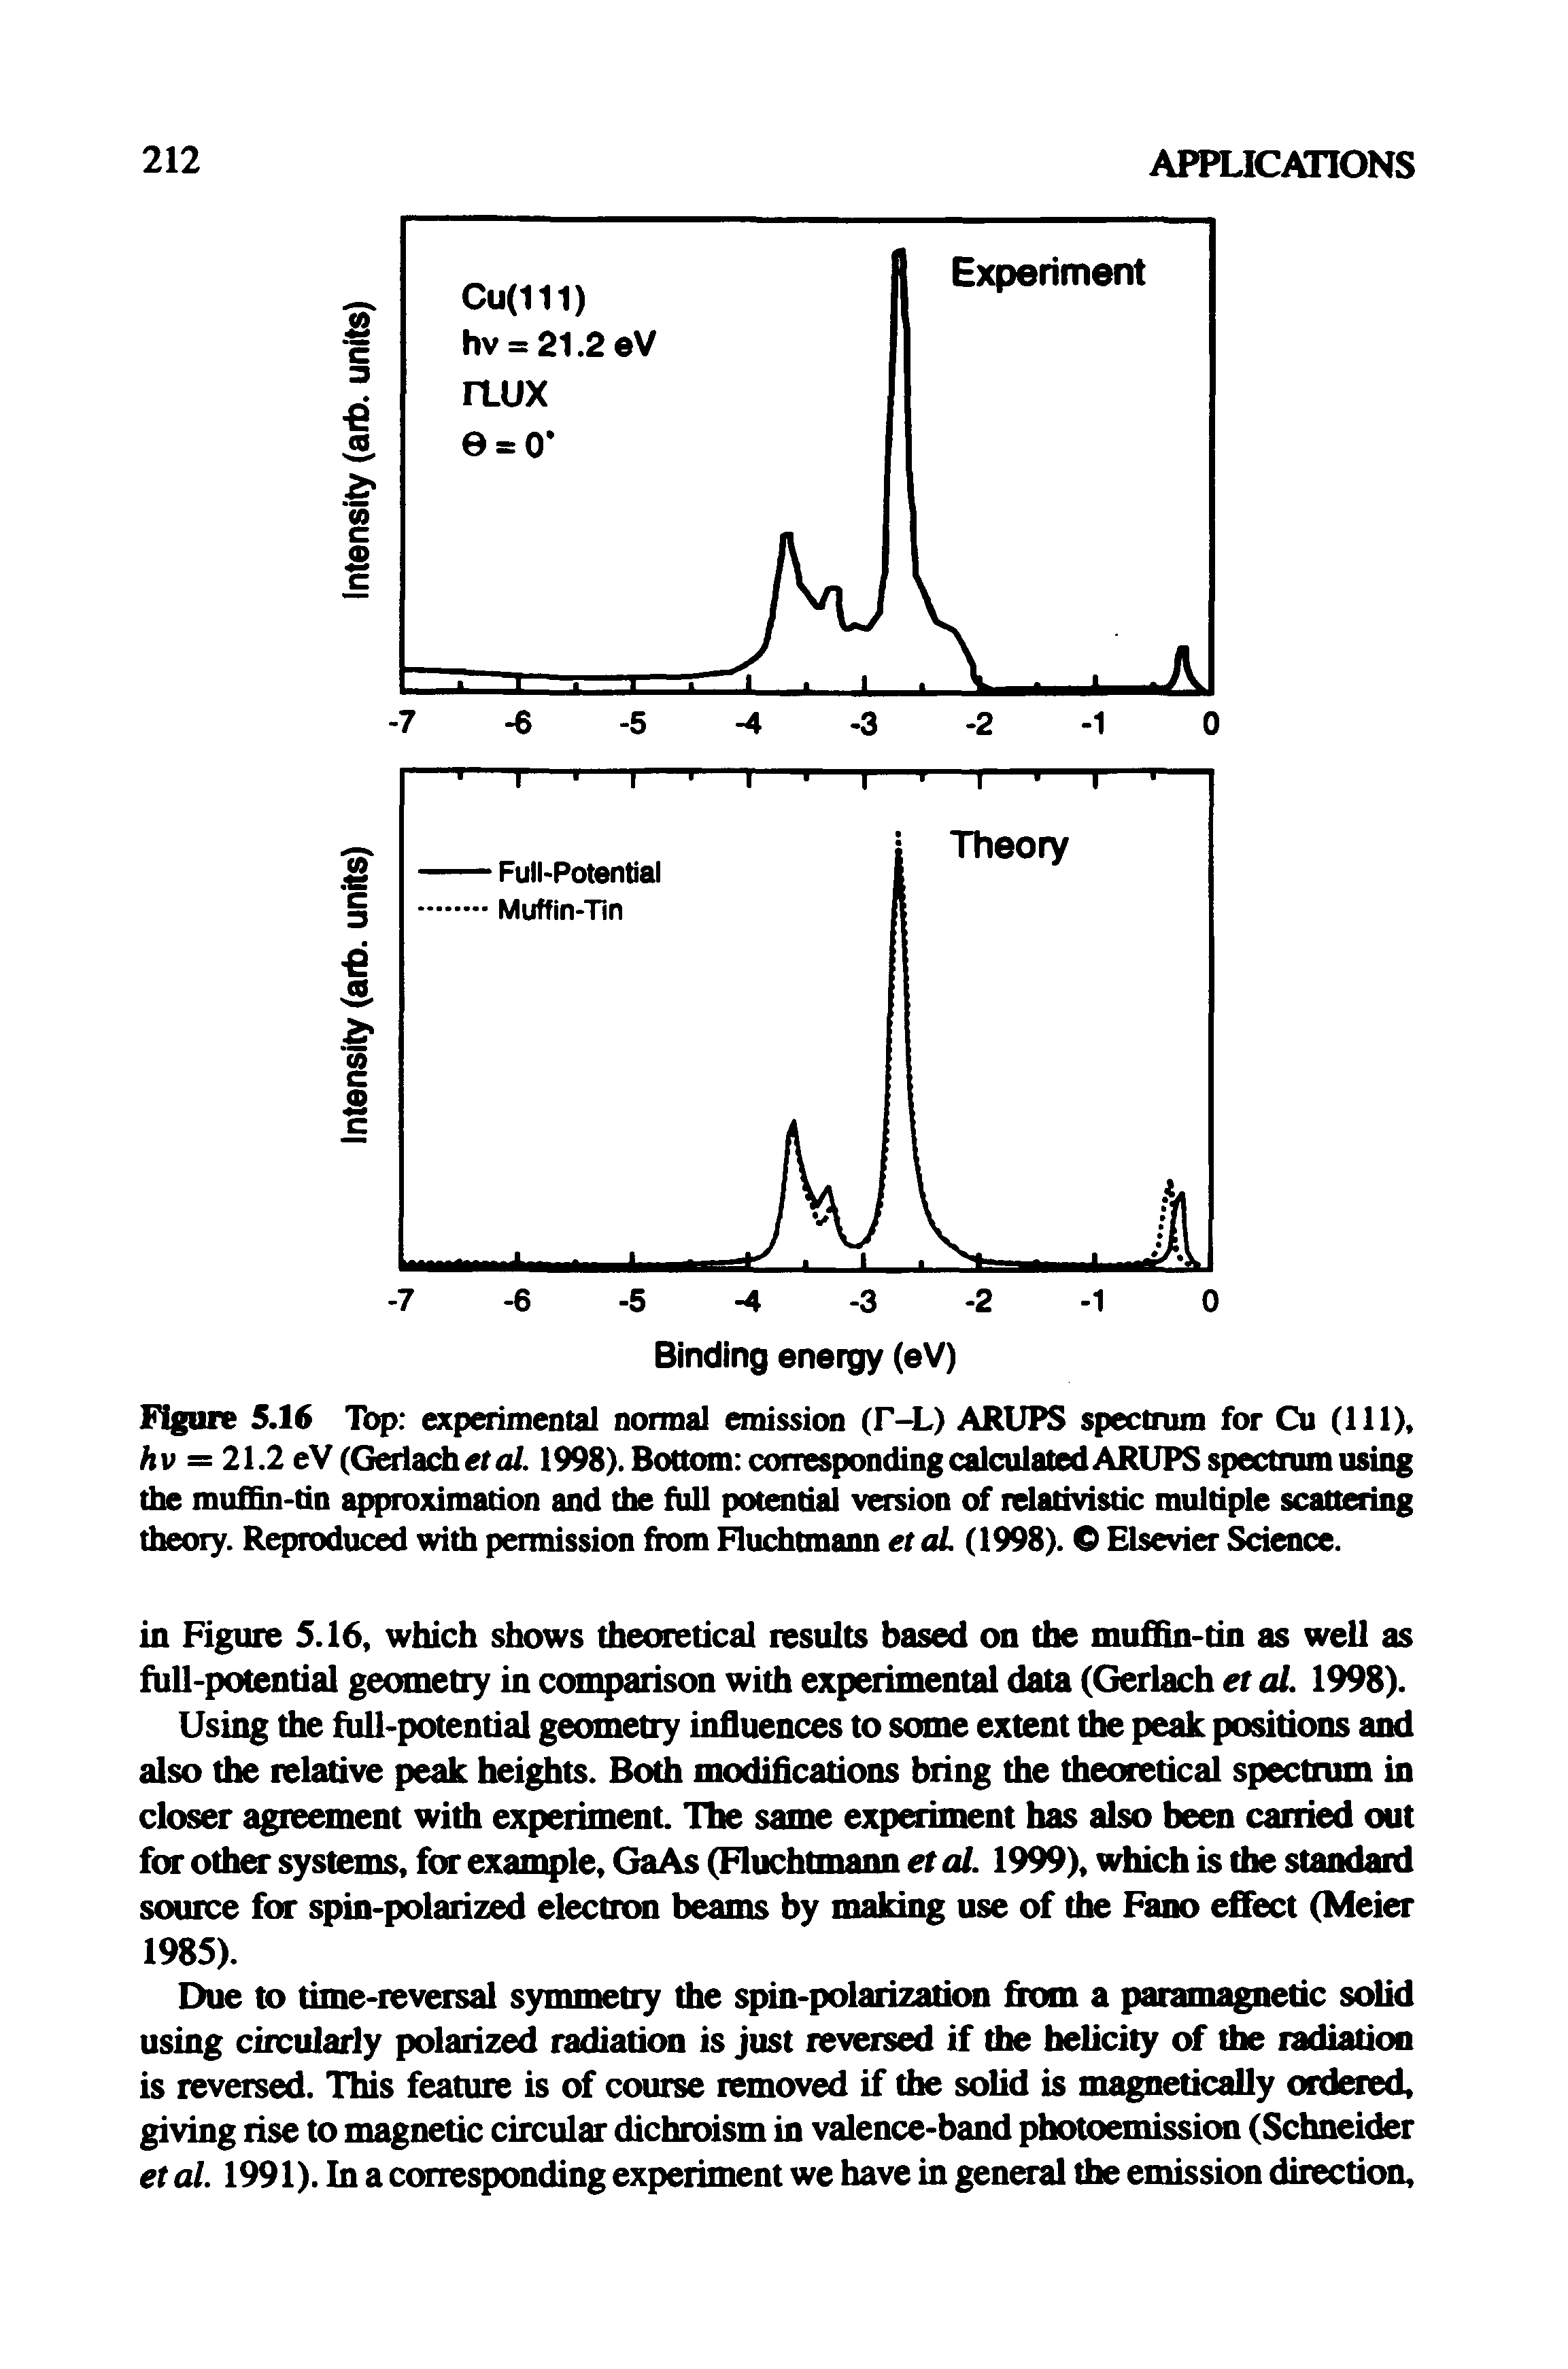 Figure 5.16 Top experimental normal emission (T-L) ARUPS spectrum for Cu (111), hv = 21.2 eV (Geriach etal. 1998). Bottom corresponding calculated ARUPS spectram using the muffin-tin approximation and the full potential version of relativistic multiple scattering theory. Reproduced with permission from Fluchtmann et aL (1998). Elsevier Science.